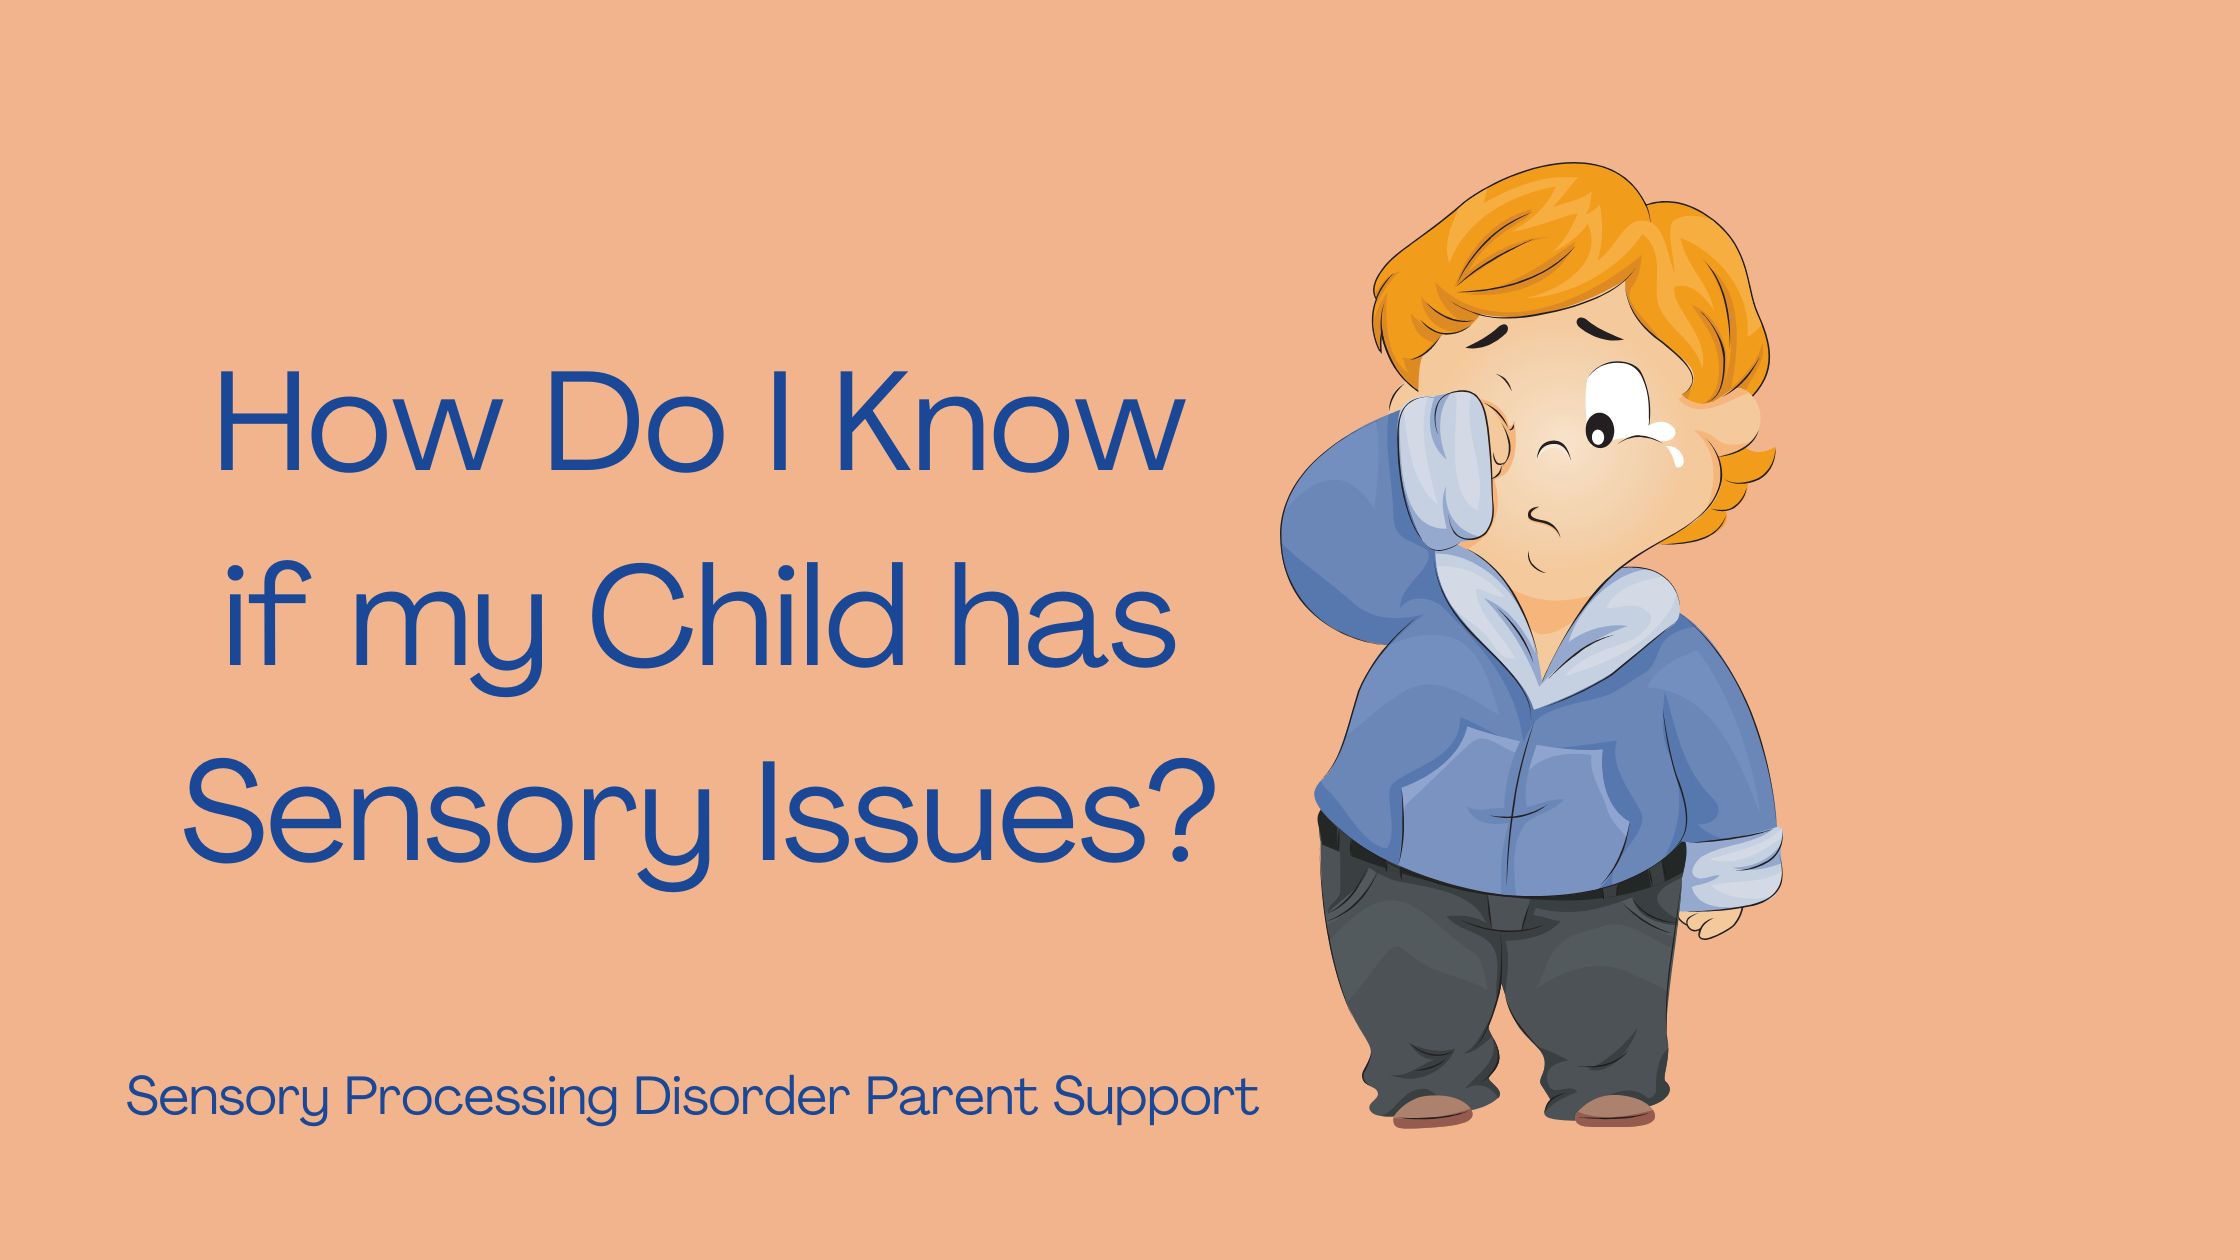 child with sensory processing disorder crying How Do I Know if my Child has Sensory Issues?